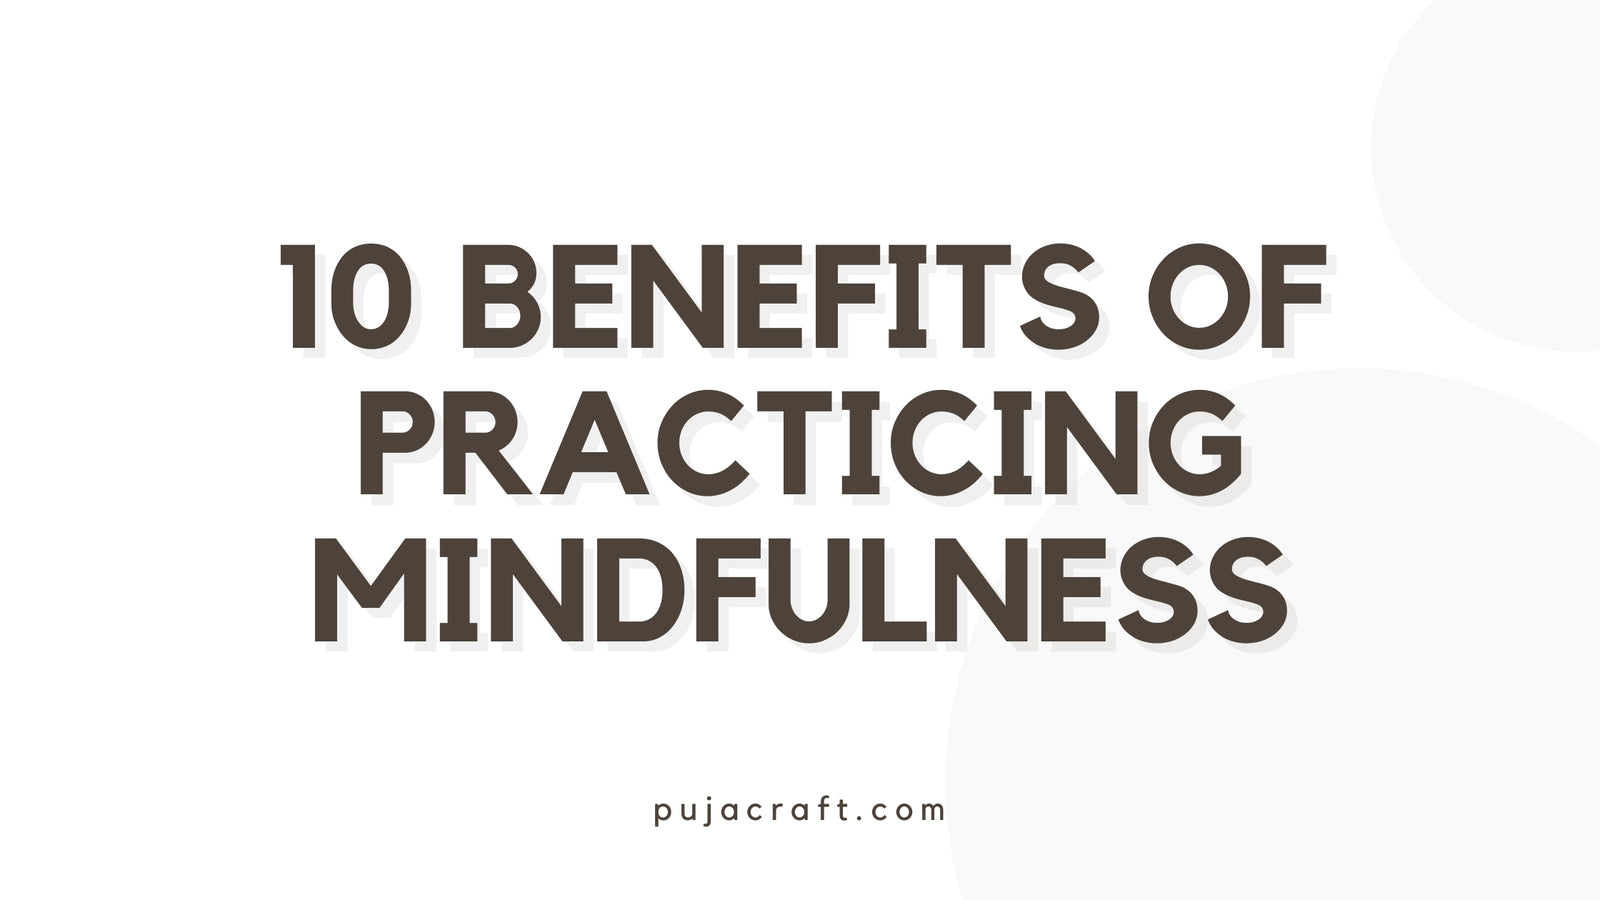 10 Benefits of Practicing Mindfulness